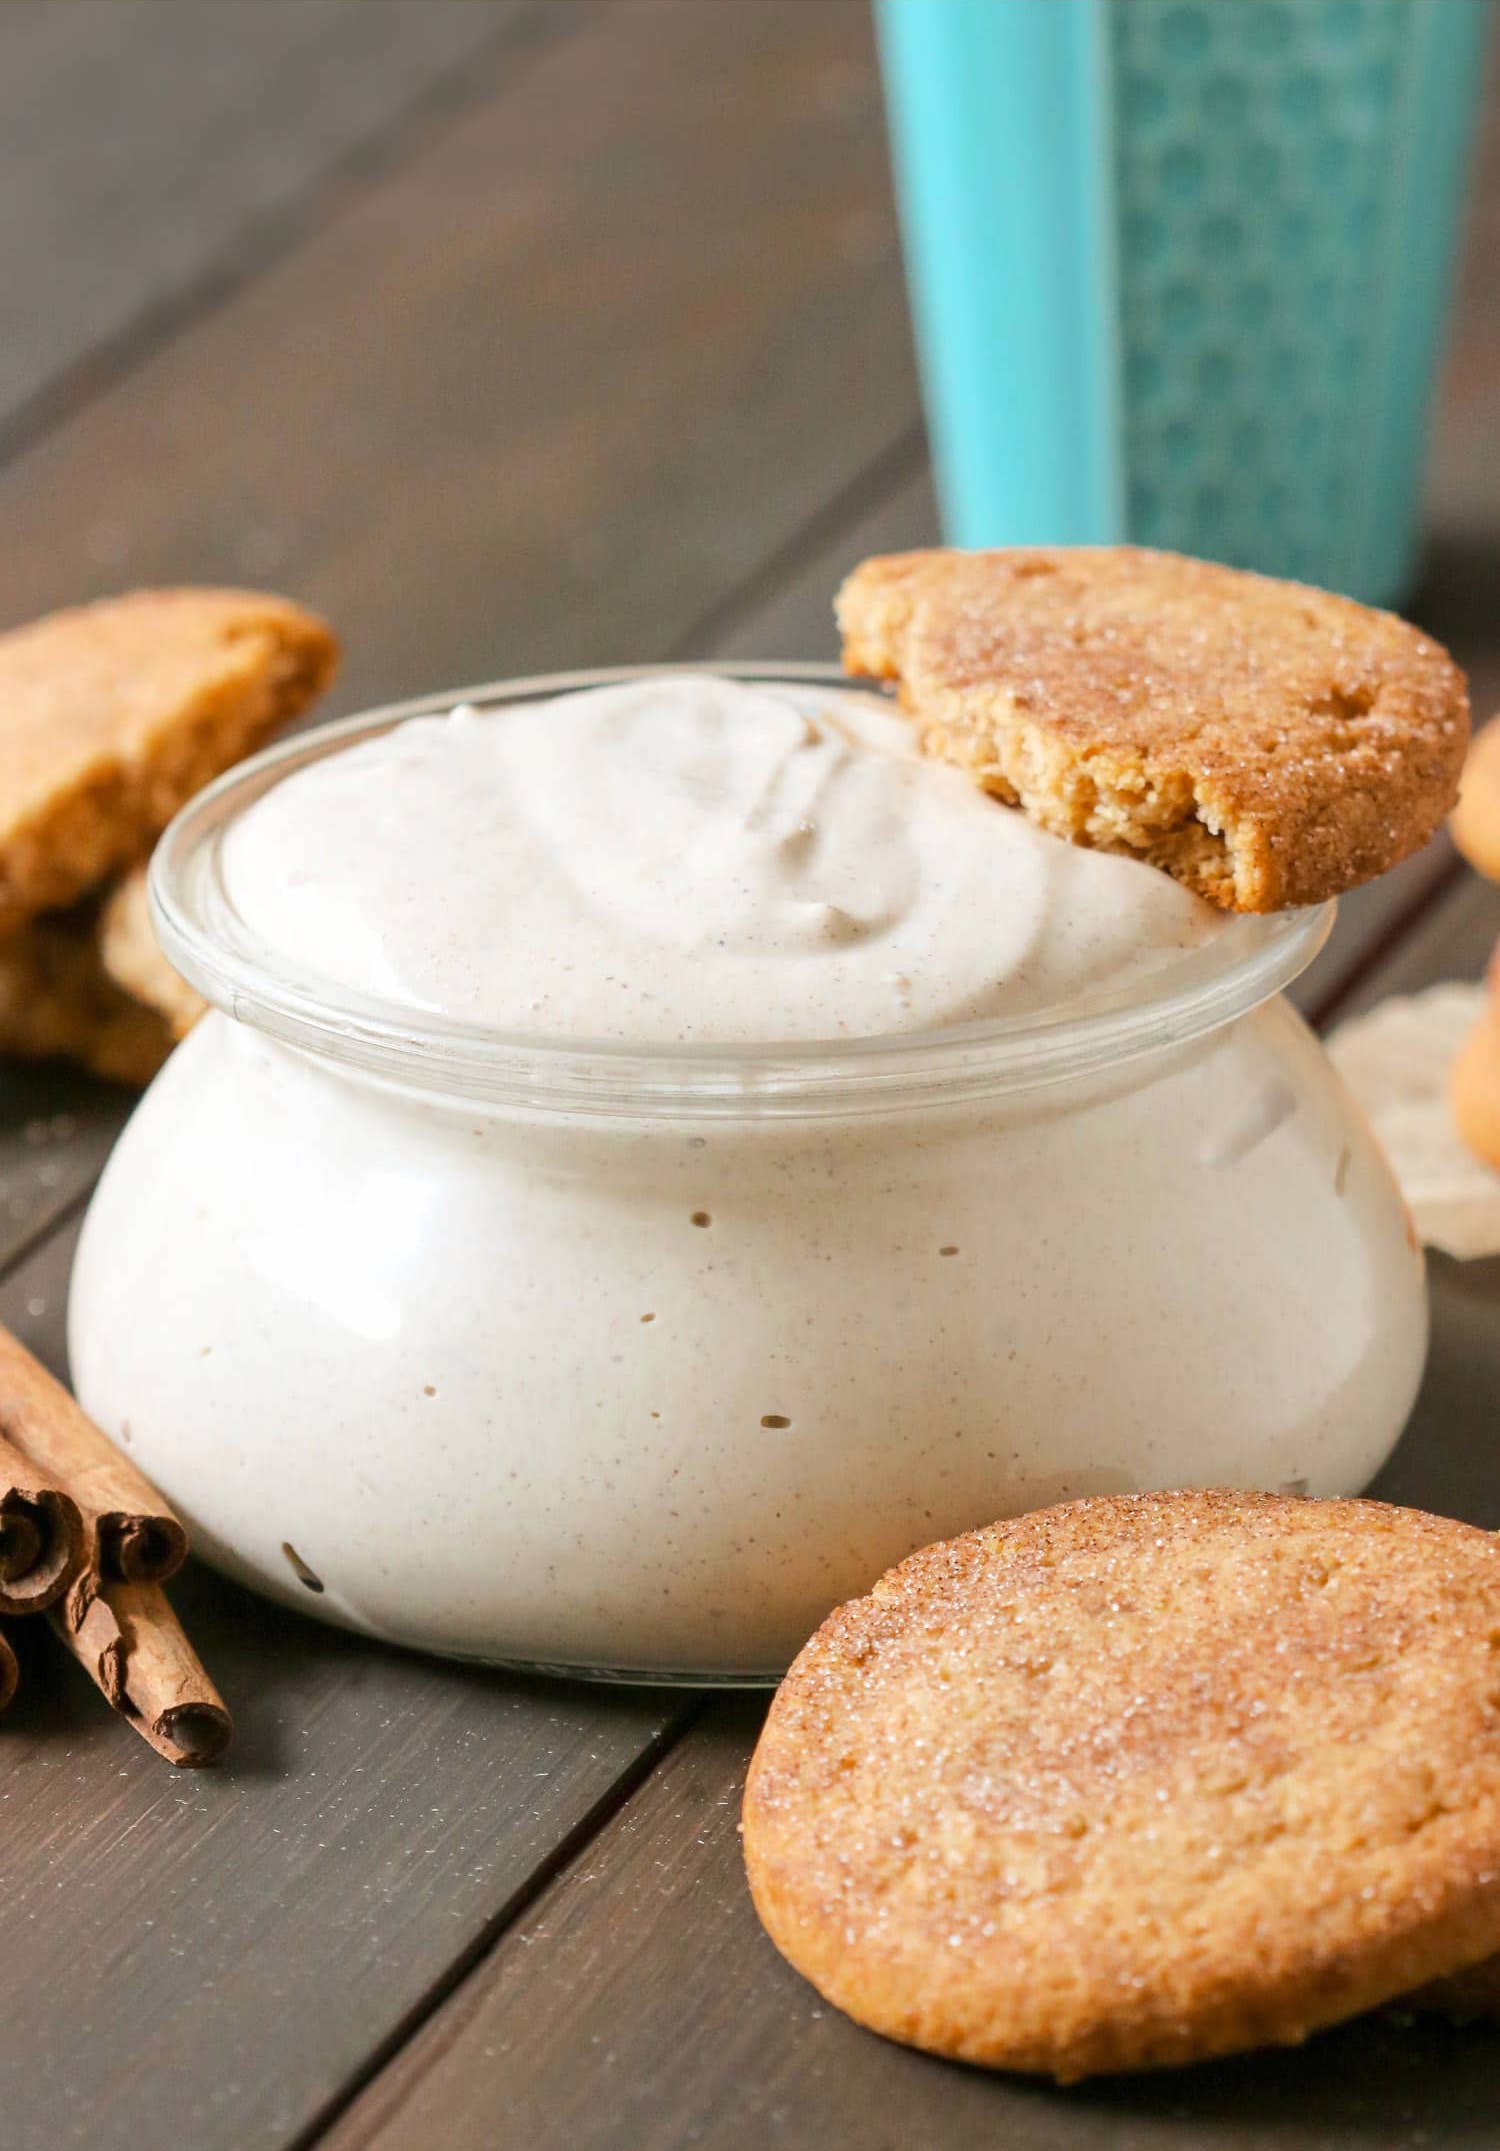 Weekly meal plan: Snickerdoodle Dip at Desserts with Benefits